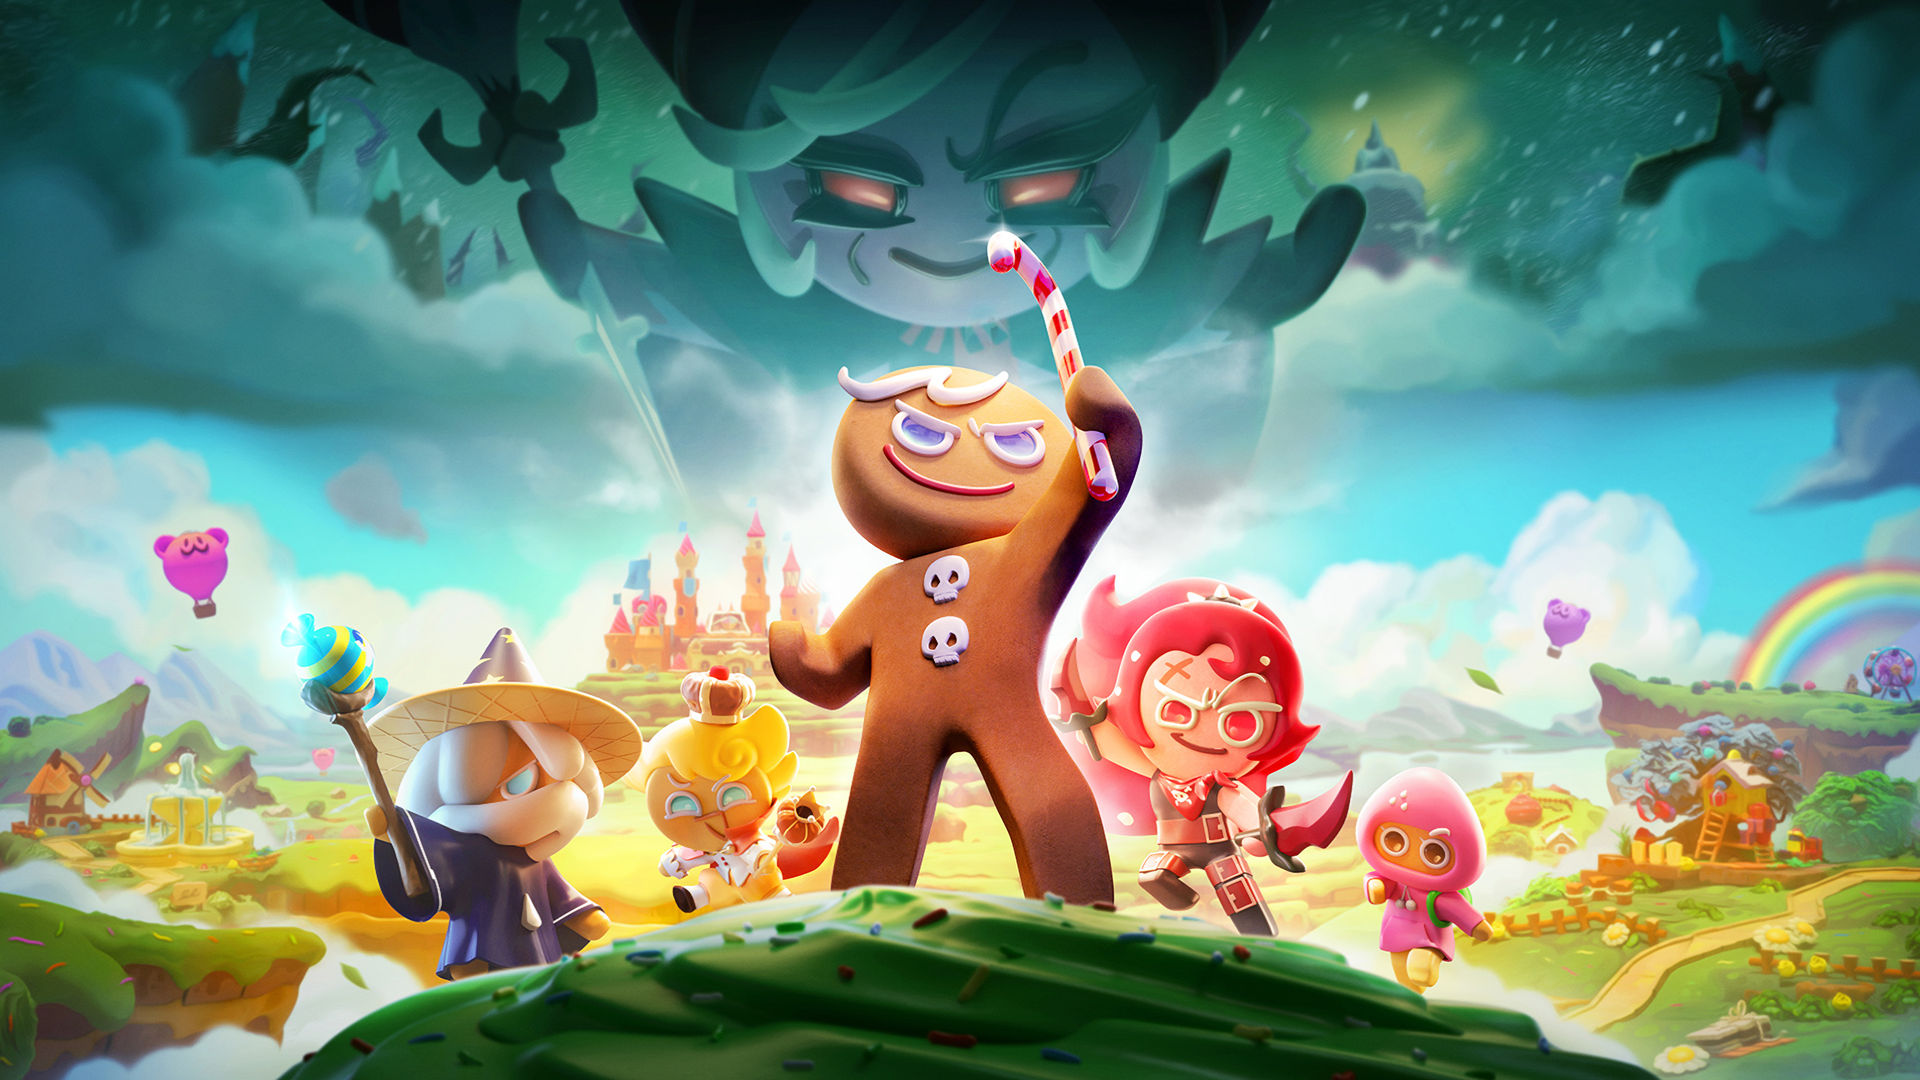 Cookie Run: Kingdom gives you the chance to win $50,000 in its